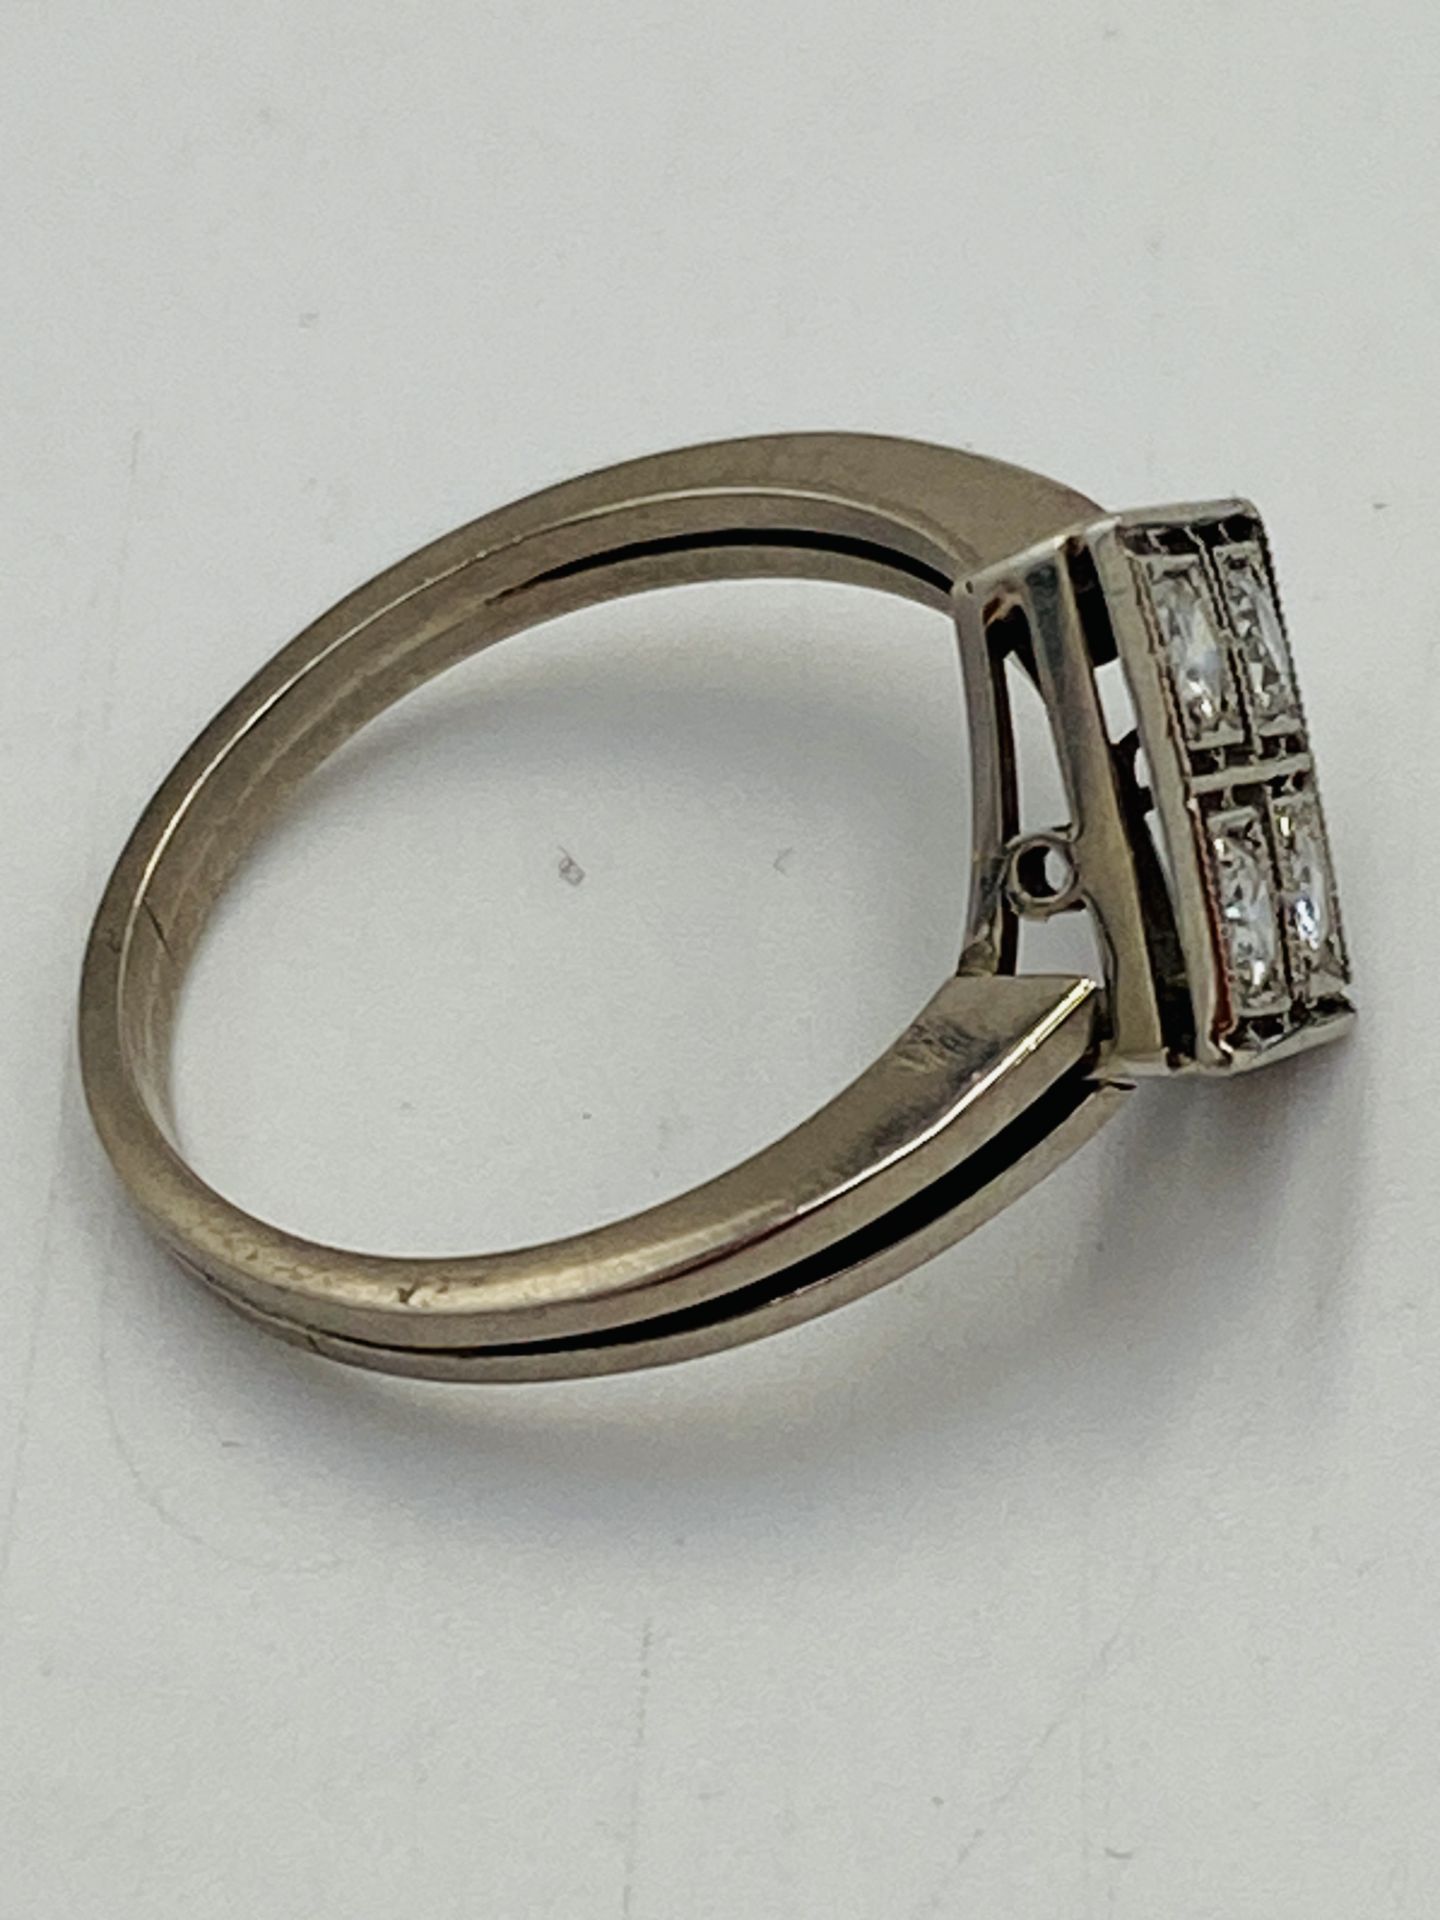 White gold ring set with four diamonds - Image 2 of 6